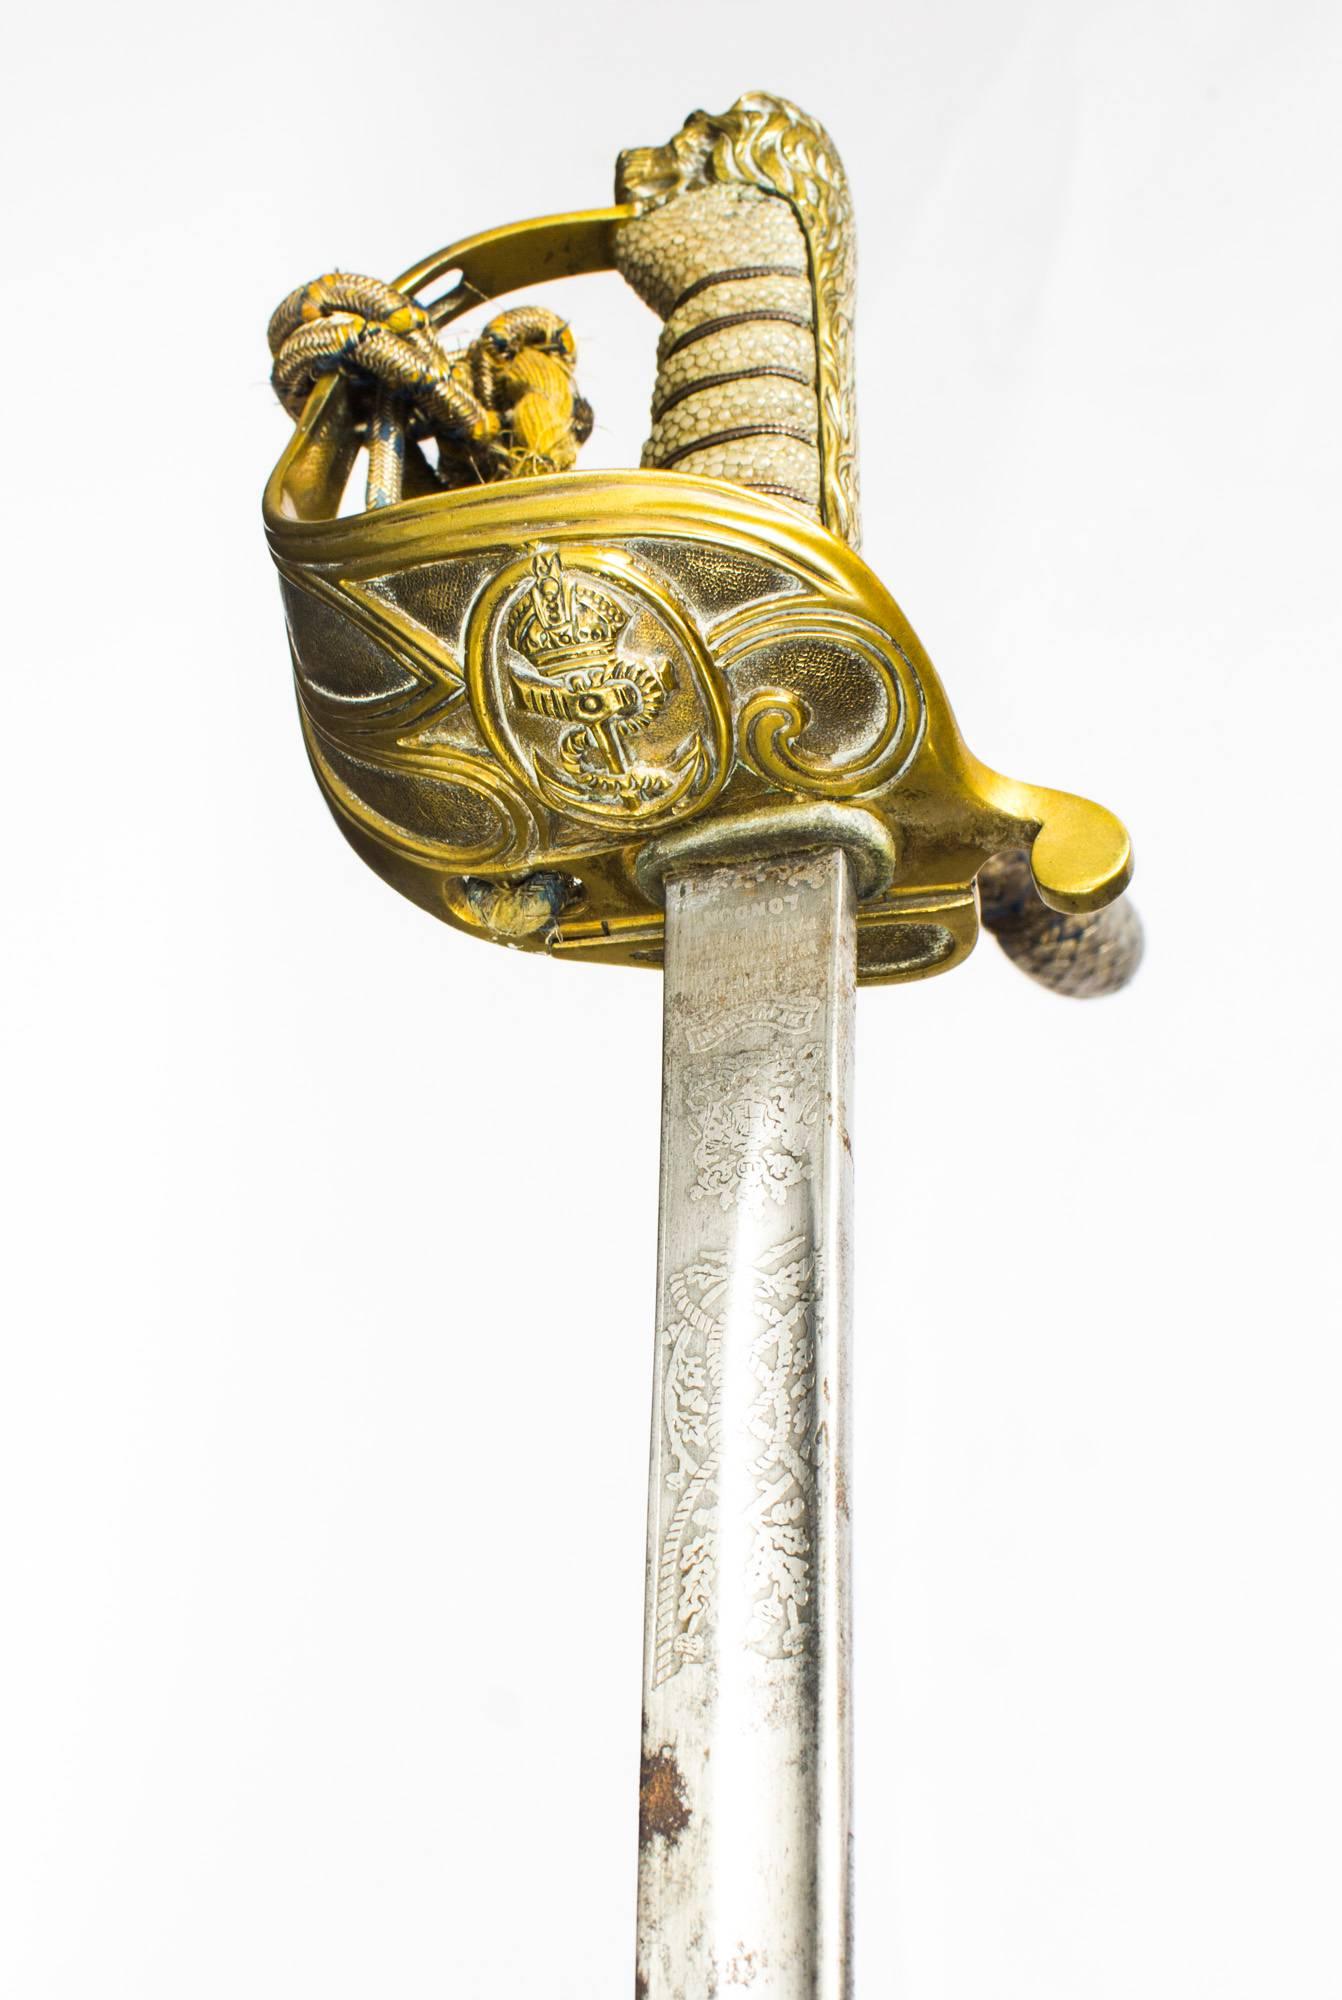 A superb Naval officers sword by Henry Wilkinson, Pall Mall, London, retailed by Gieves Ltd of London, circa 1897 in date.

The sword features a brass lions head hilt, and a brass guard with shagreen hilt, the guard with a crown over an